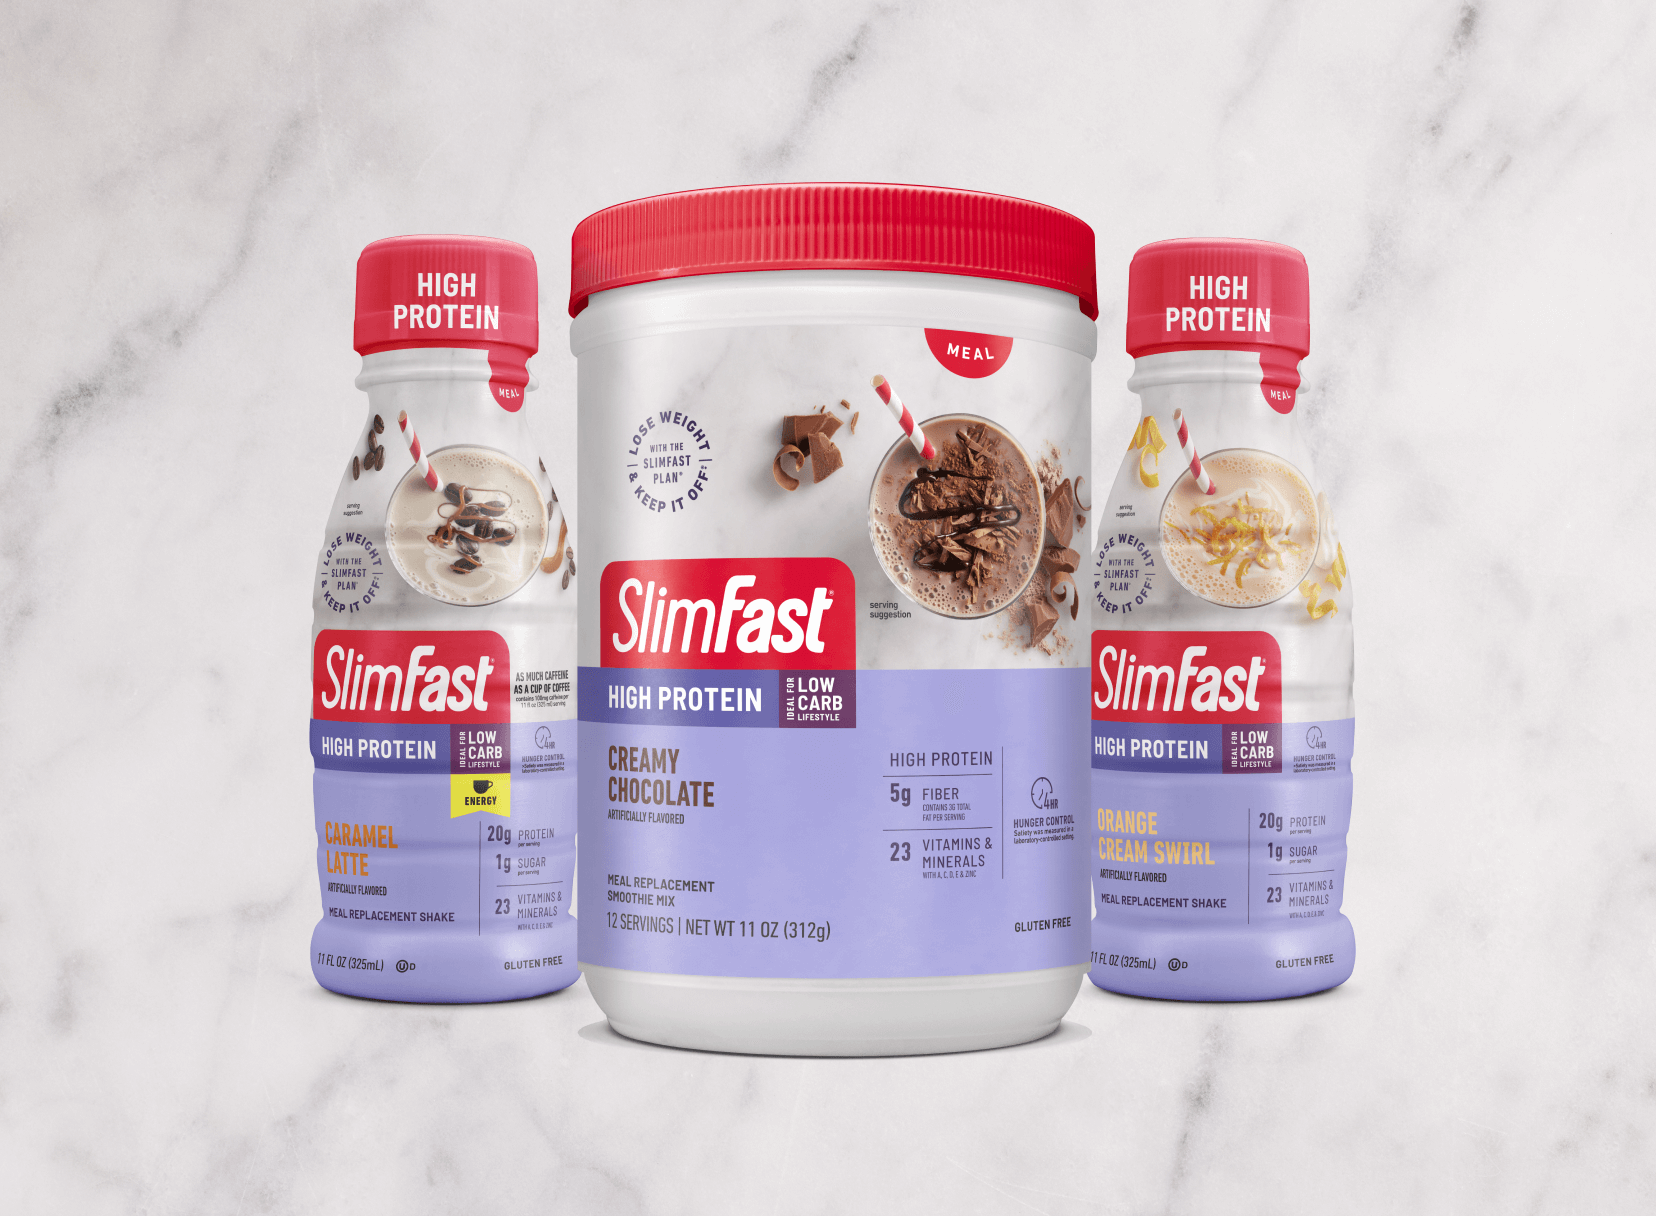 Product renders of SlimFast High Protein Powder Mixes and Ready-to-Drink Shakes in Creamy Chocolate, Caramel Latte, and Orange Cream Swirl, on a white marble background.